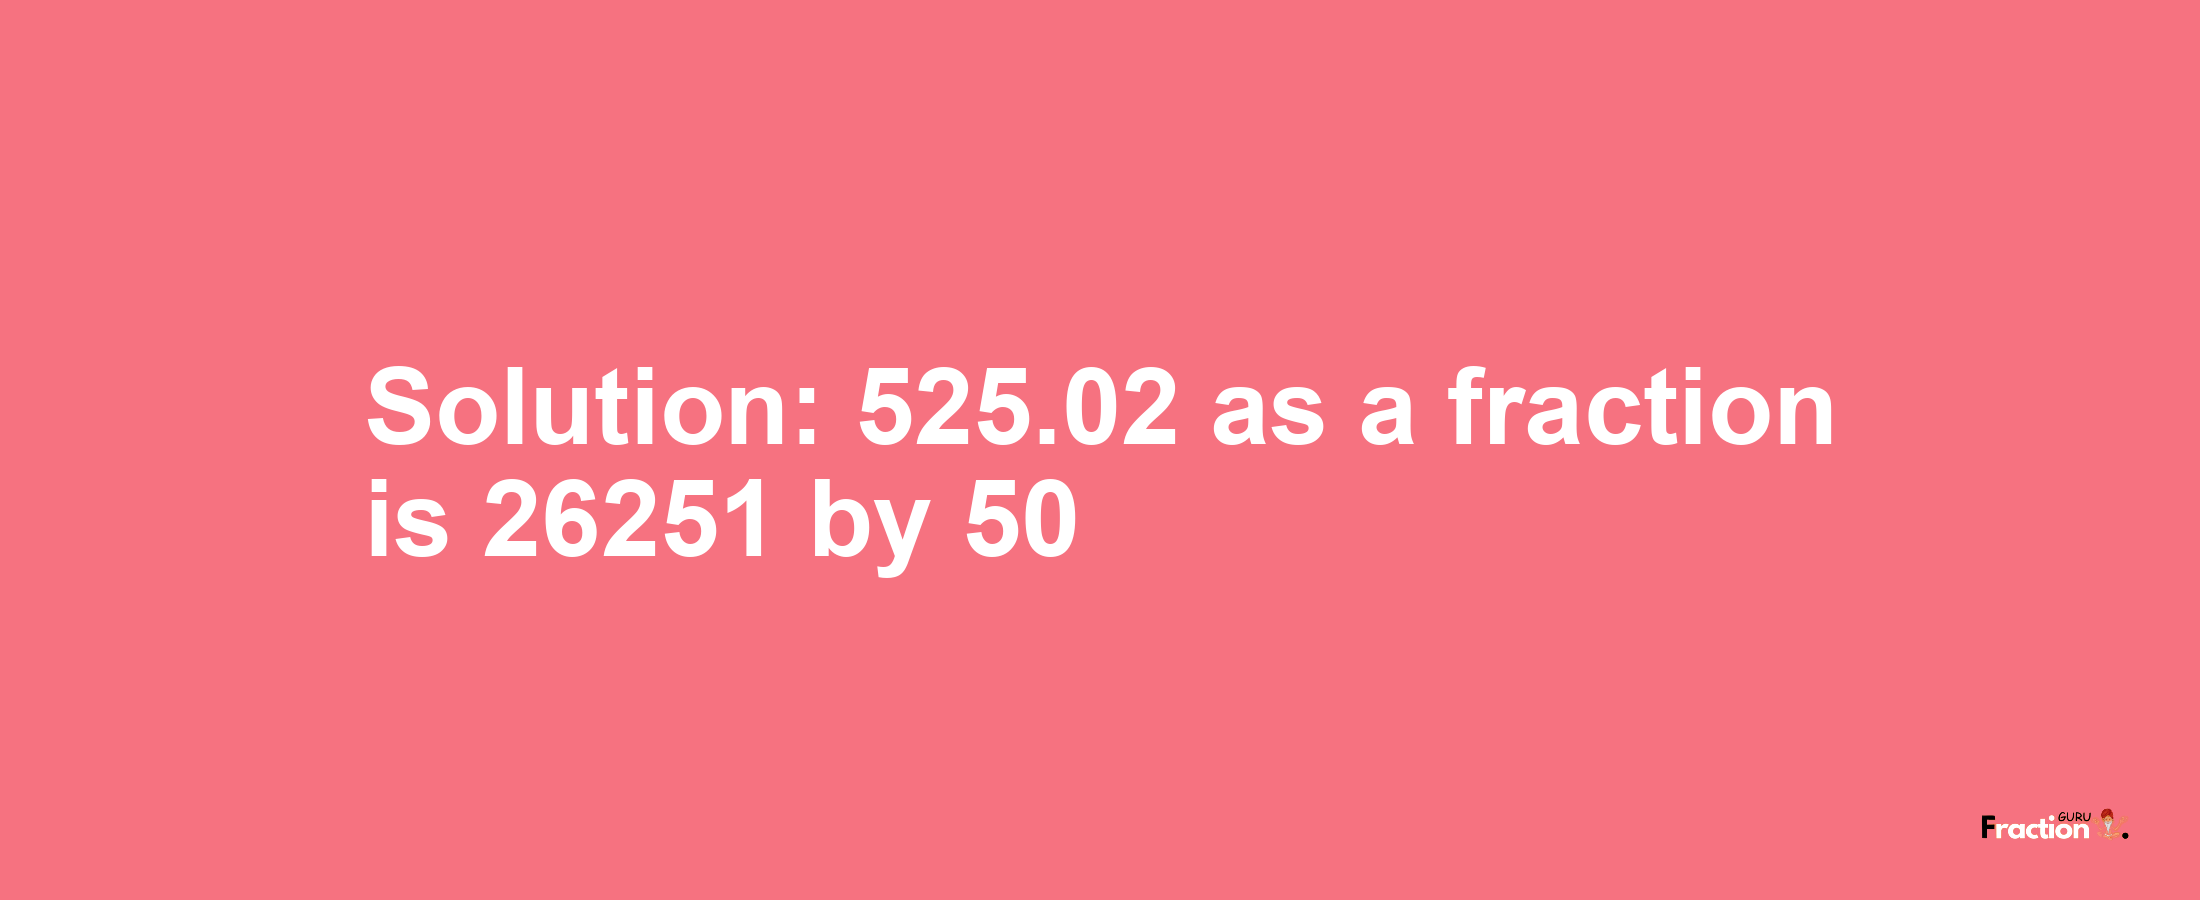 Solution:525.02 as a fraction is 26251/50